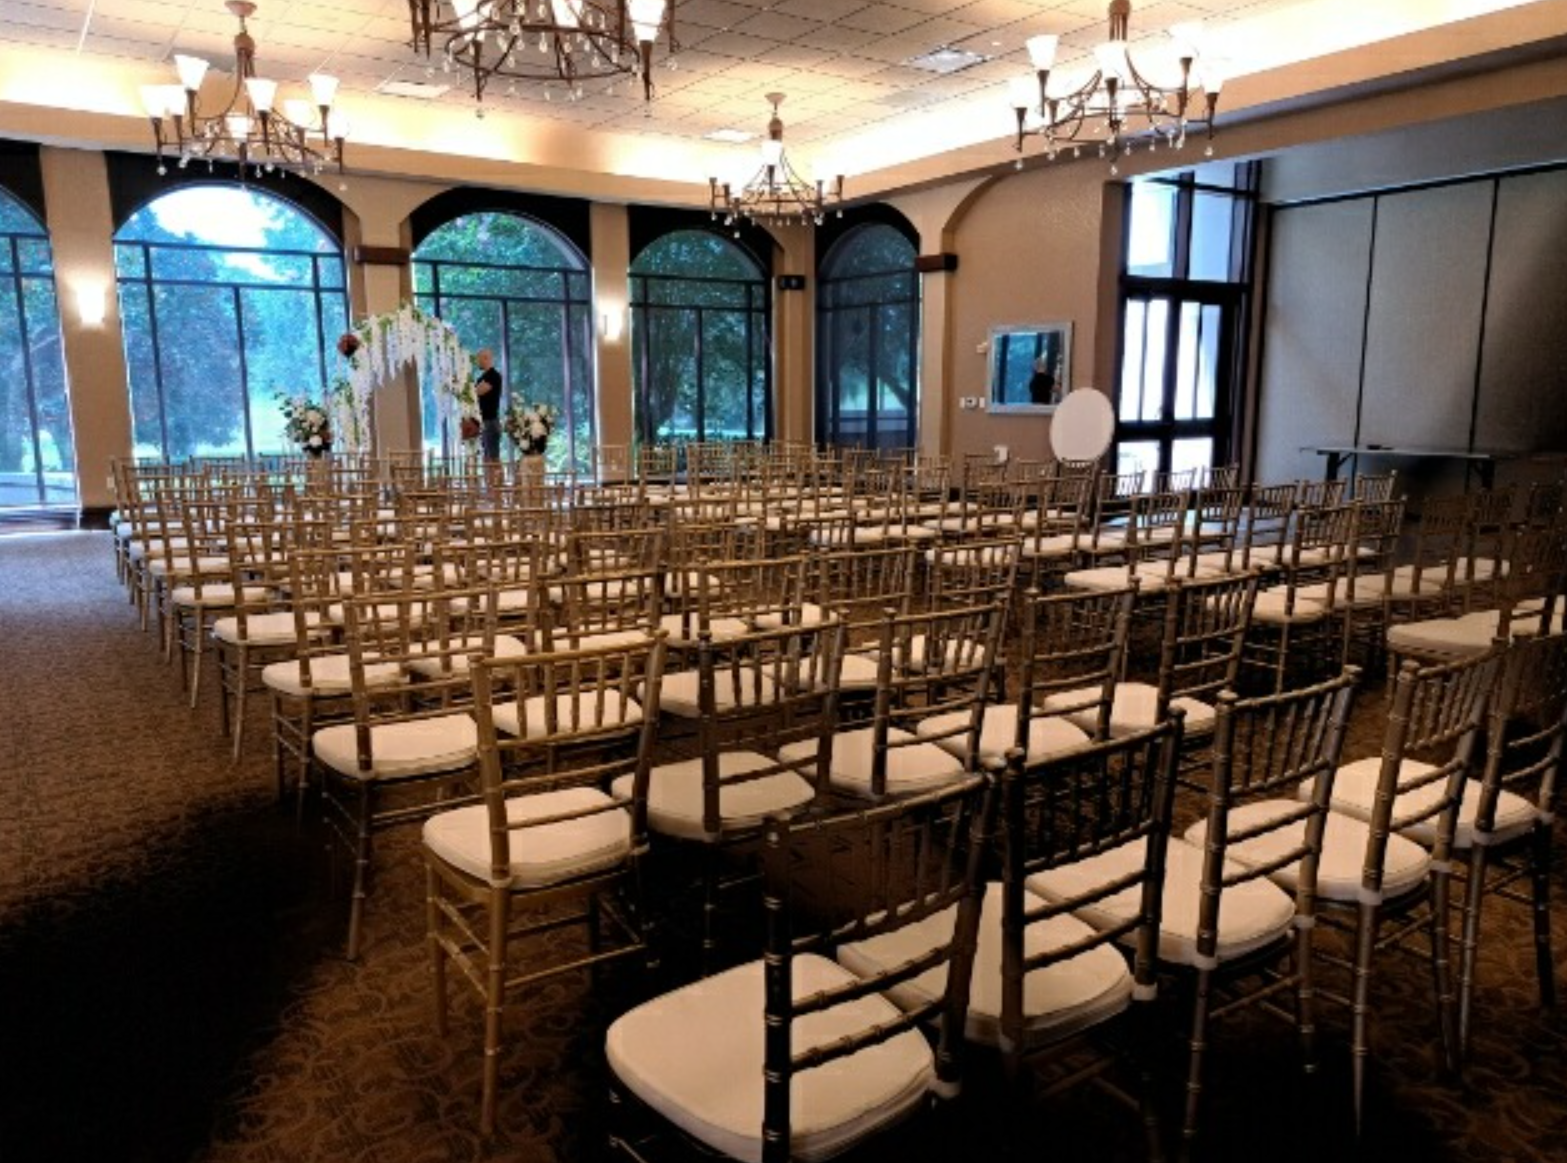 a hotel event room setup with rented chairs